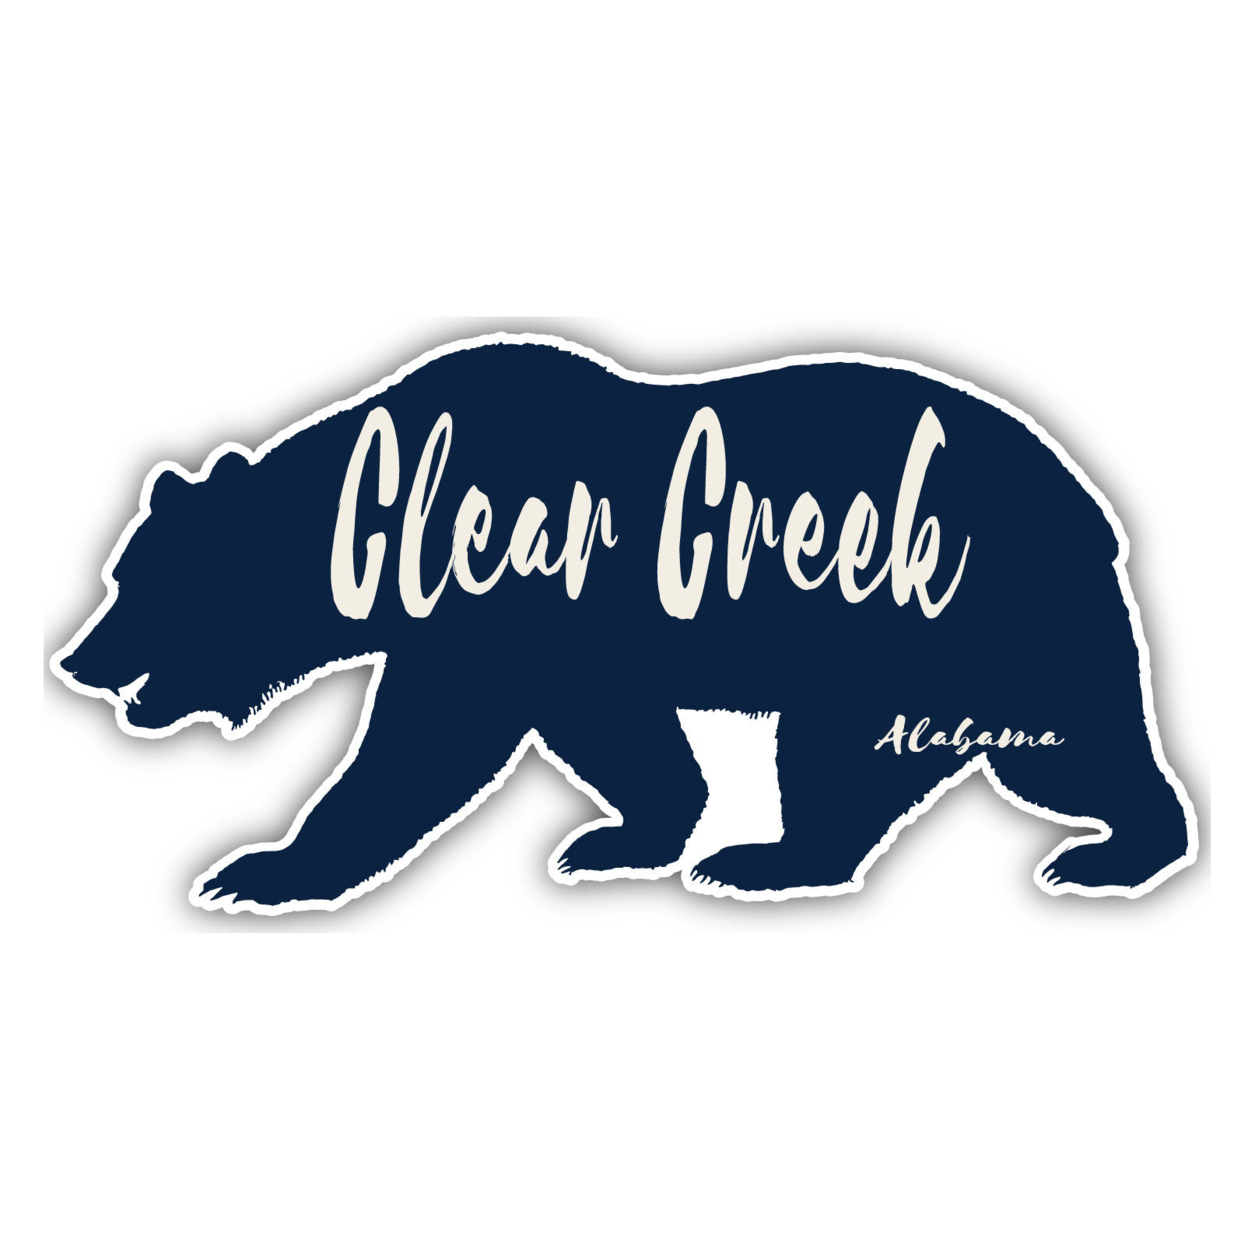 Clear Creek Alabama Souvenir Decorative Stickers (Choose Theme And Size) - 4-Pack, 10-Inch, Tent